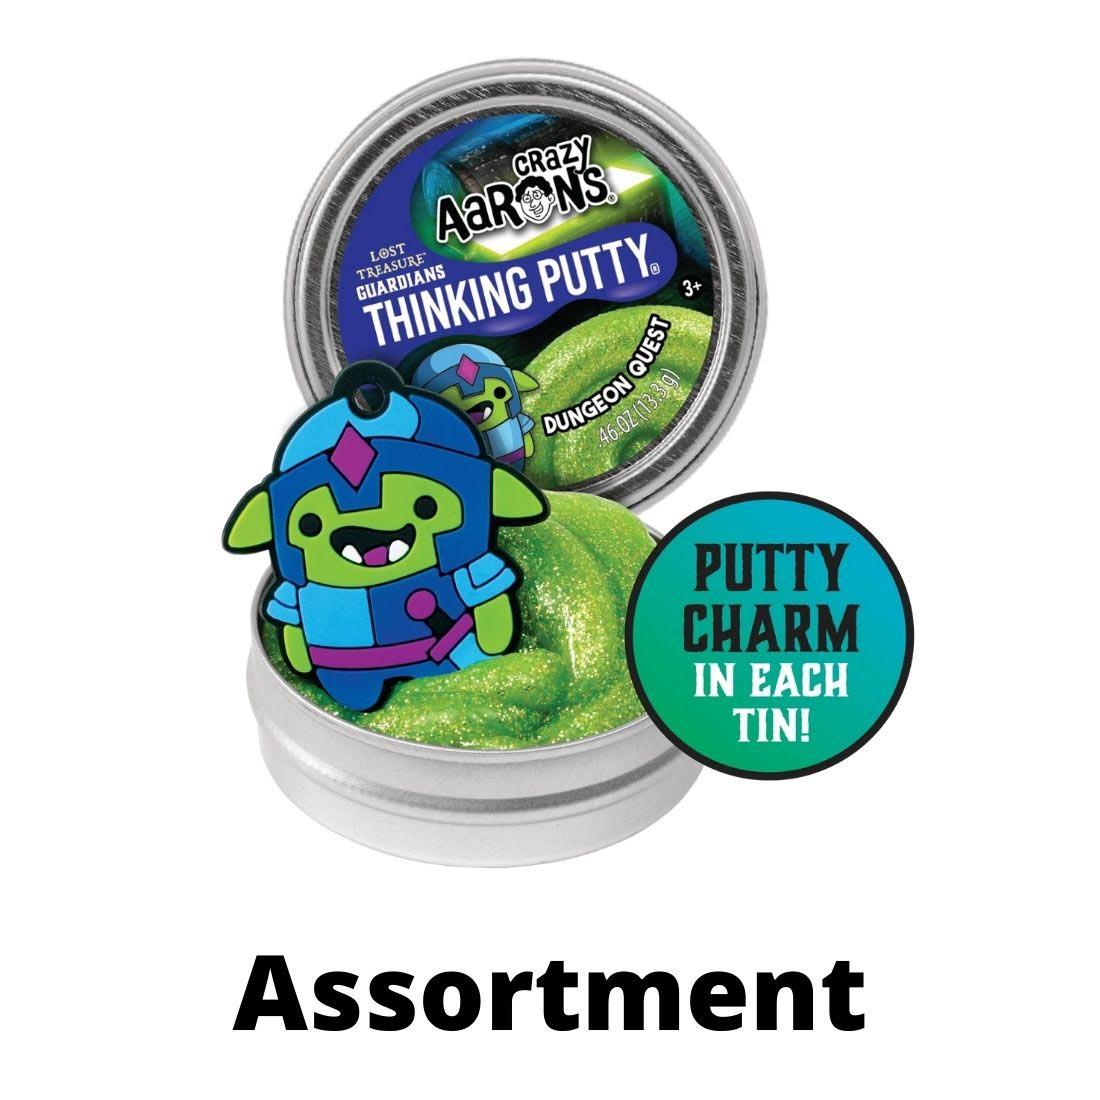 Dungeon Quest Lost Treasure Guardians Mini Thinking Putty, shown with the lid off, and a mini charm, with the words "Putty charm in each tin" and "Assortment"